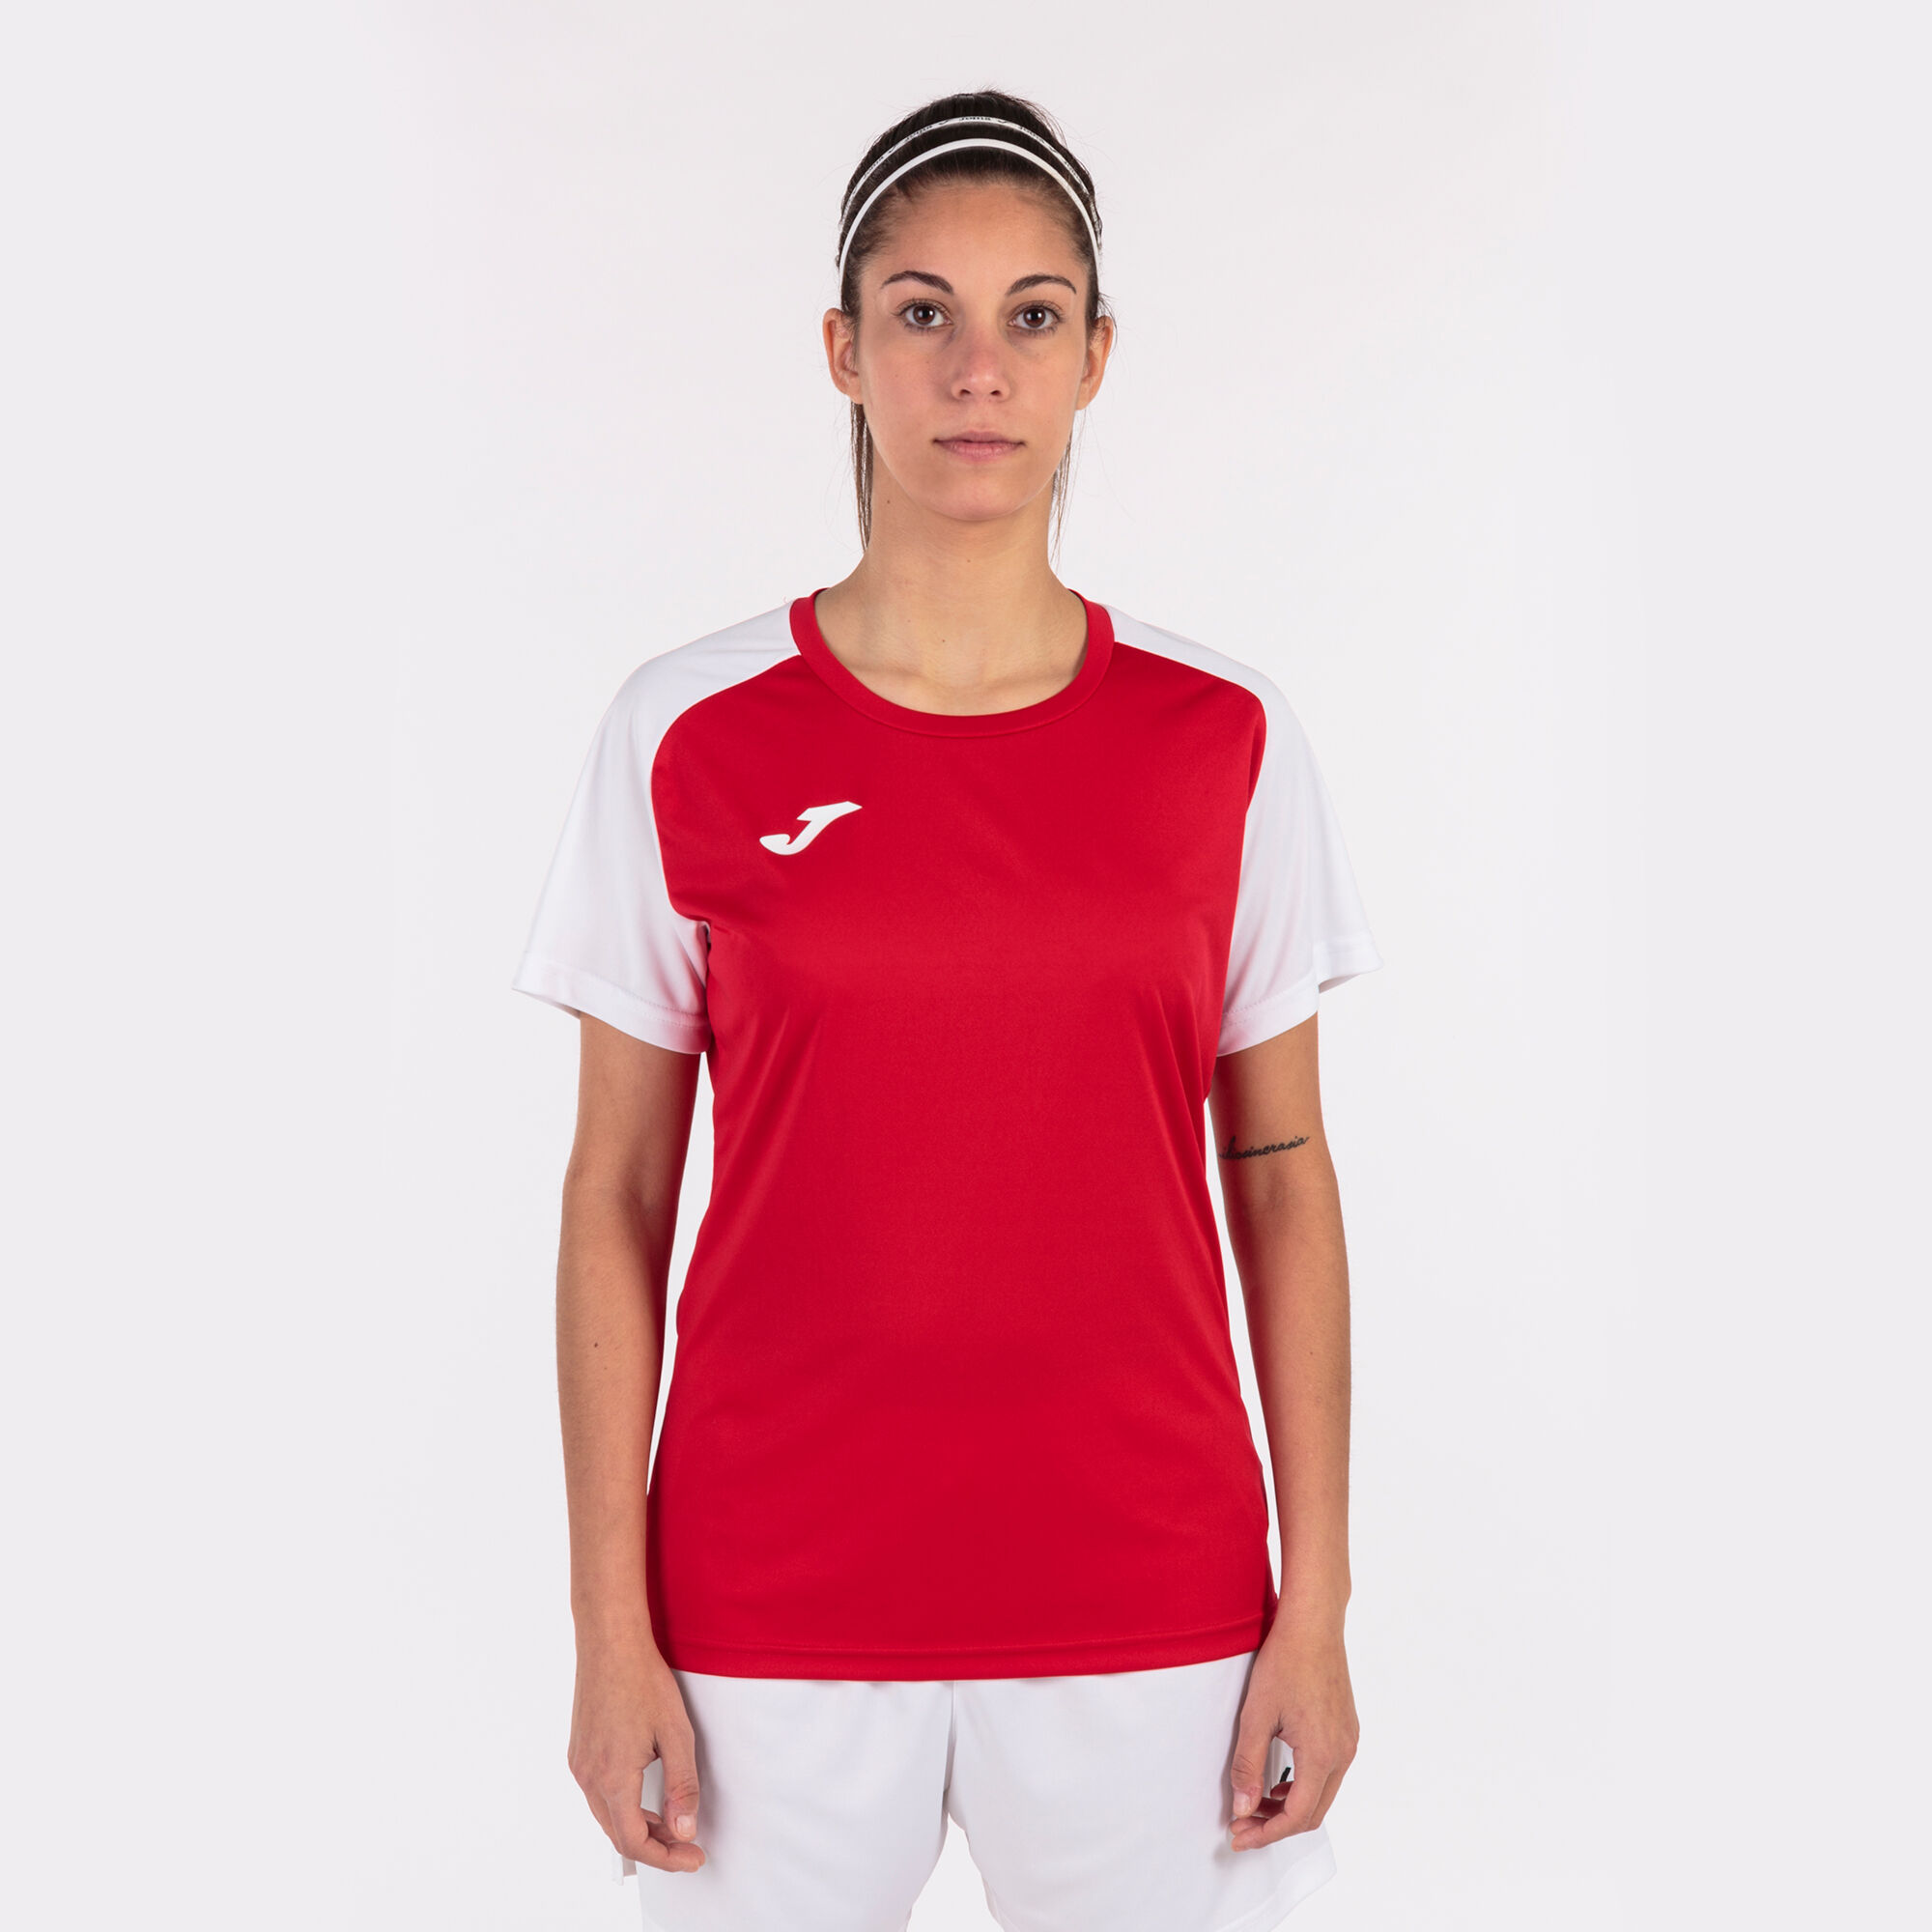 Maillot manches courtes femme Academy IV rouge blanc